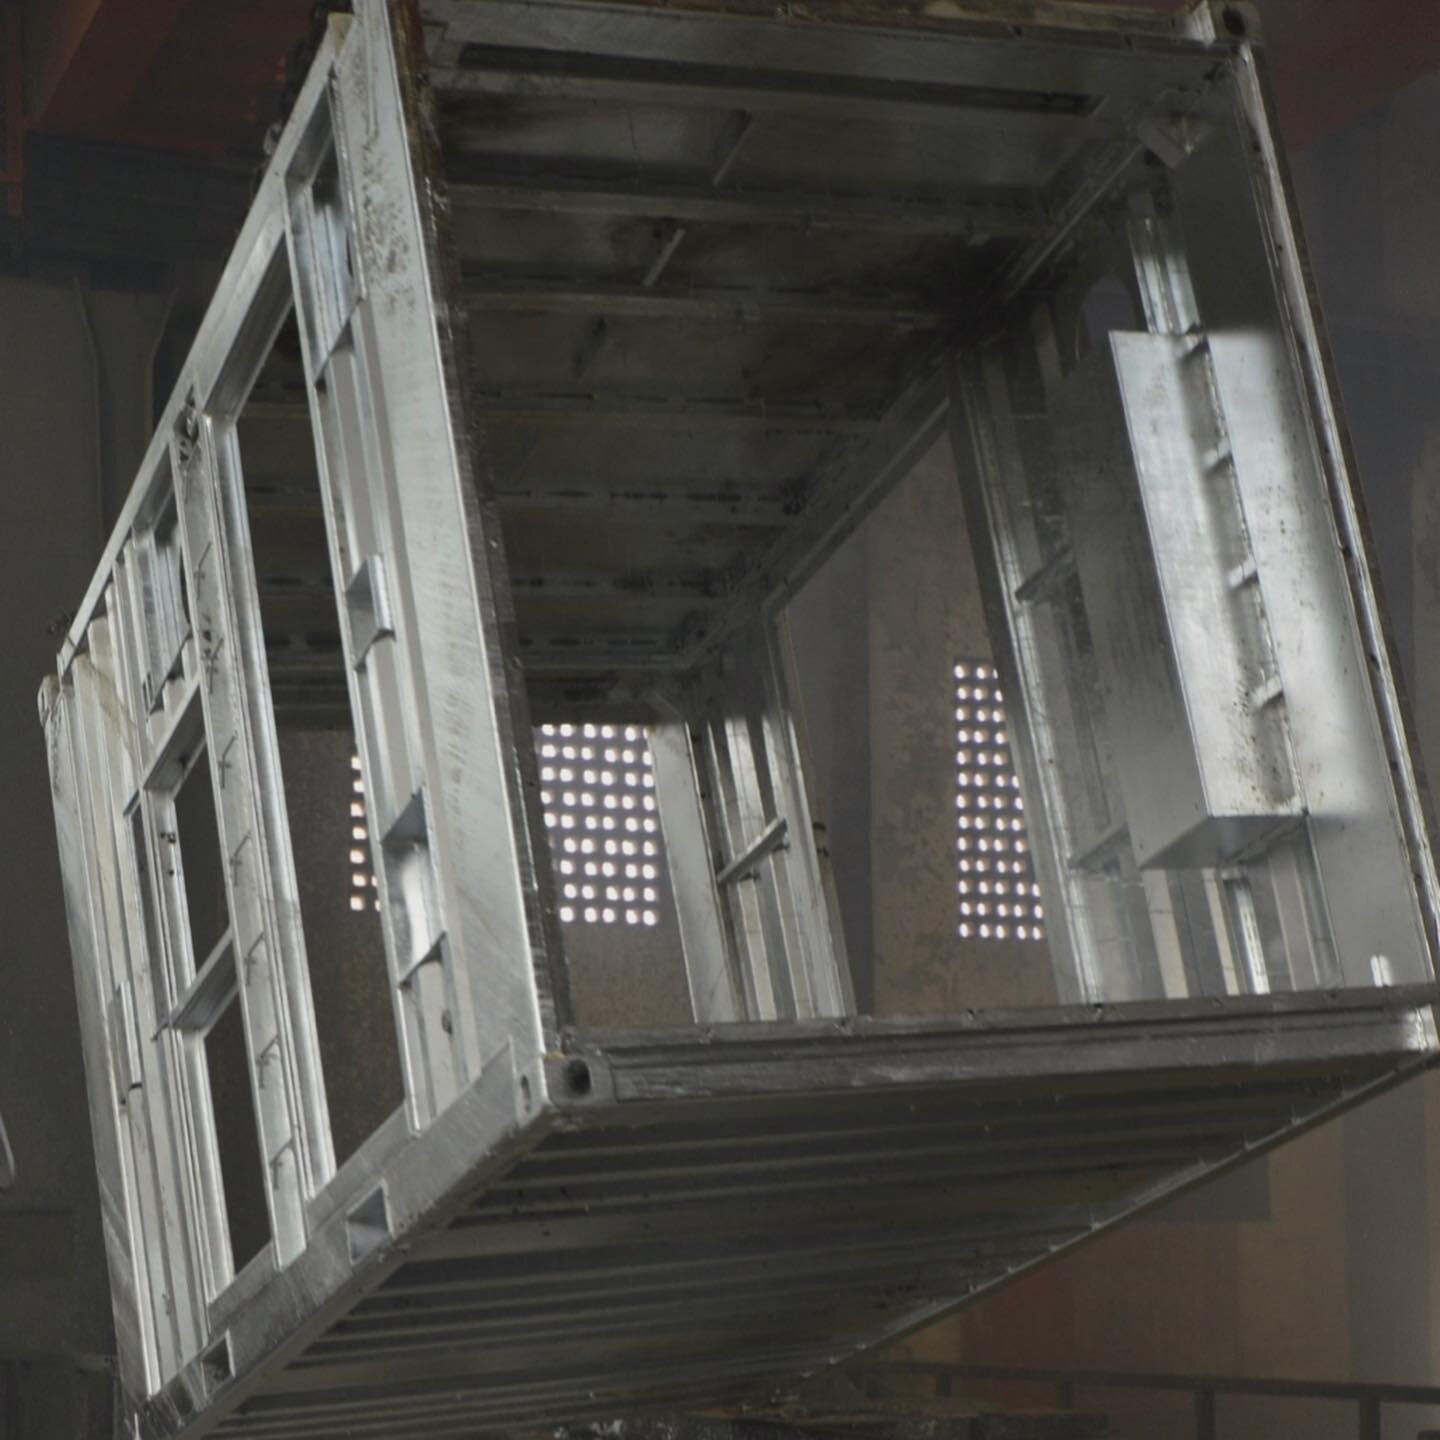 Simmonds Equipment has the ability to single hot dip galvanize full size ISO width containers and baskets.&nbsp;

☑️If you need longevity in your product from highly corrosive atmospheres, we have the solutions for your equipment.

Find more info in 